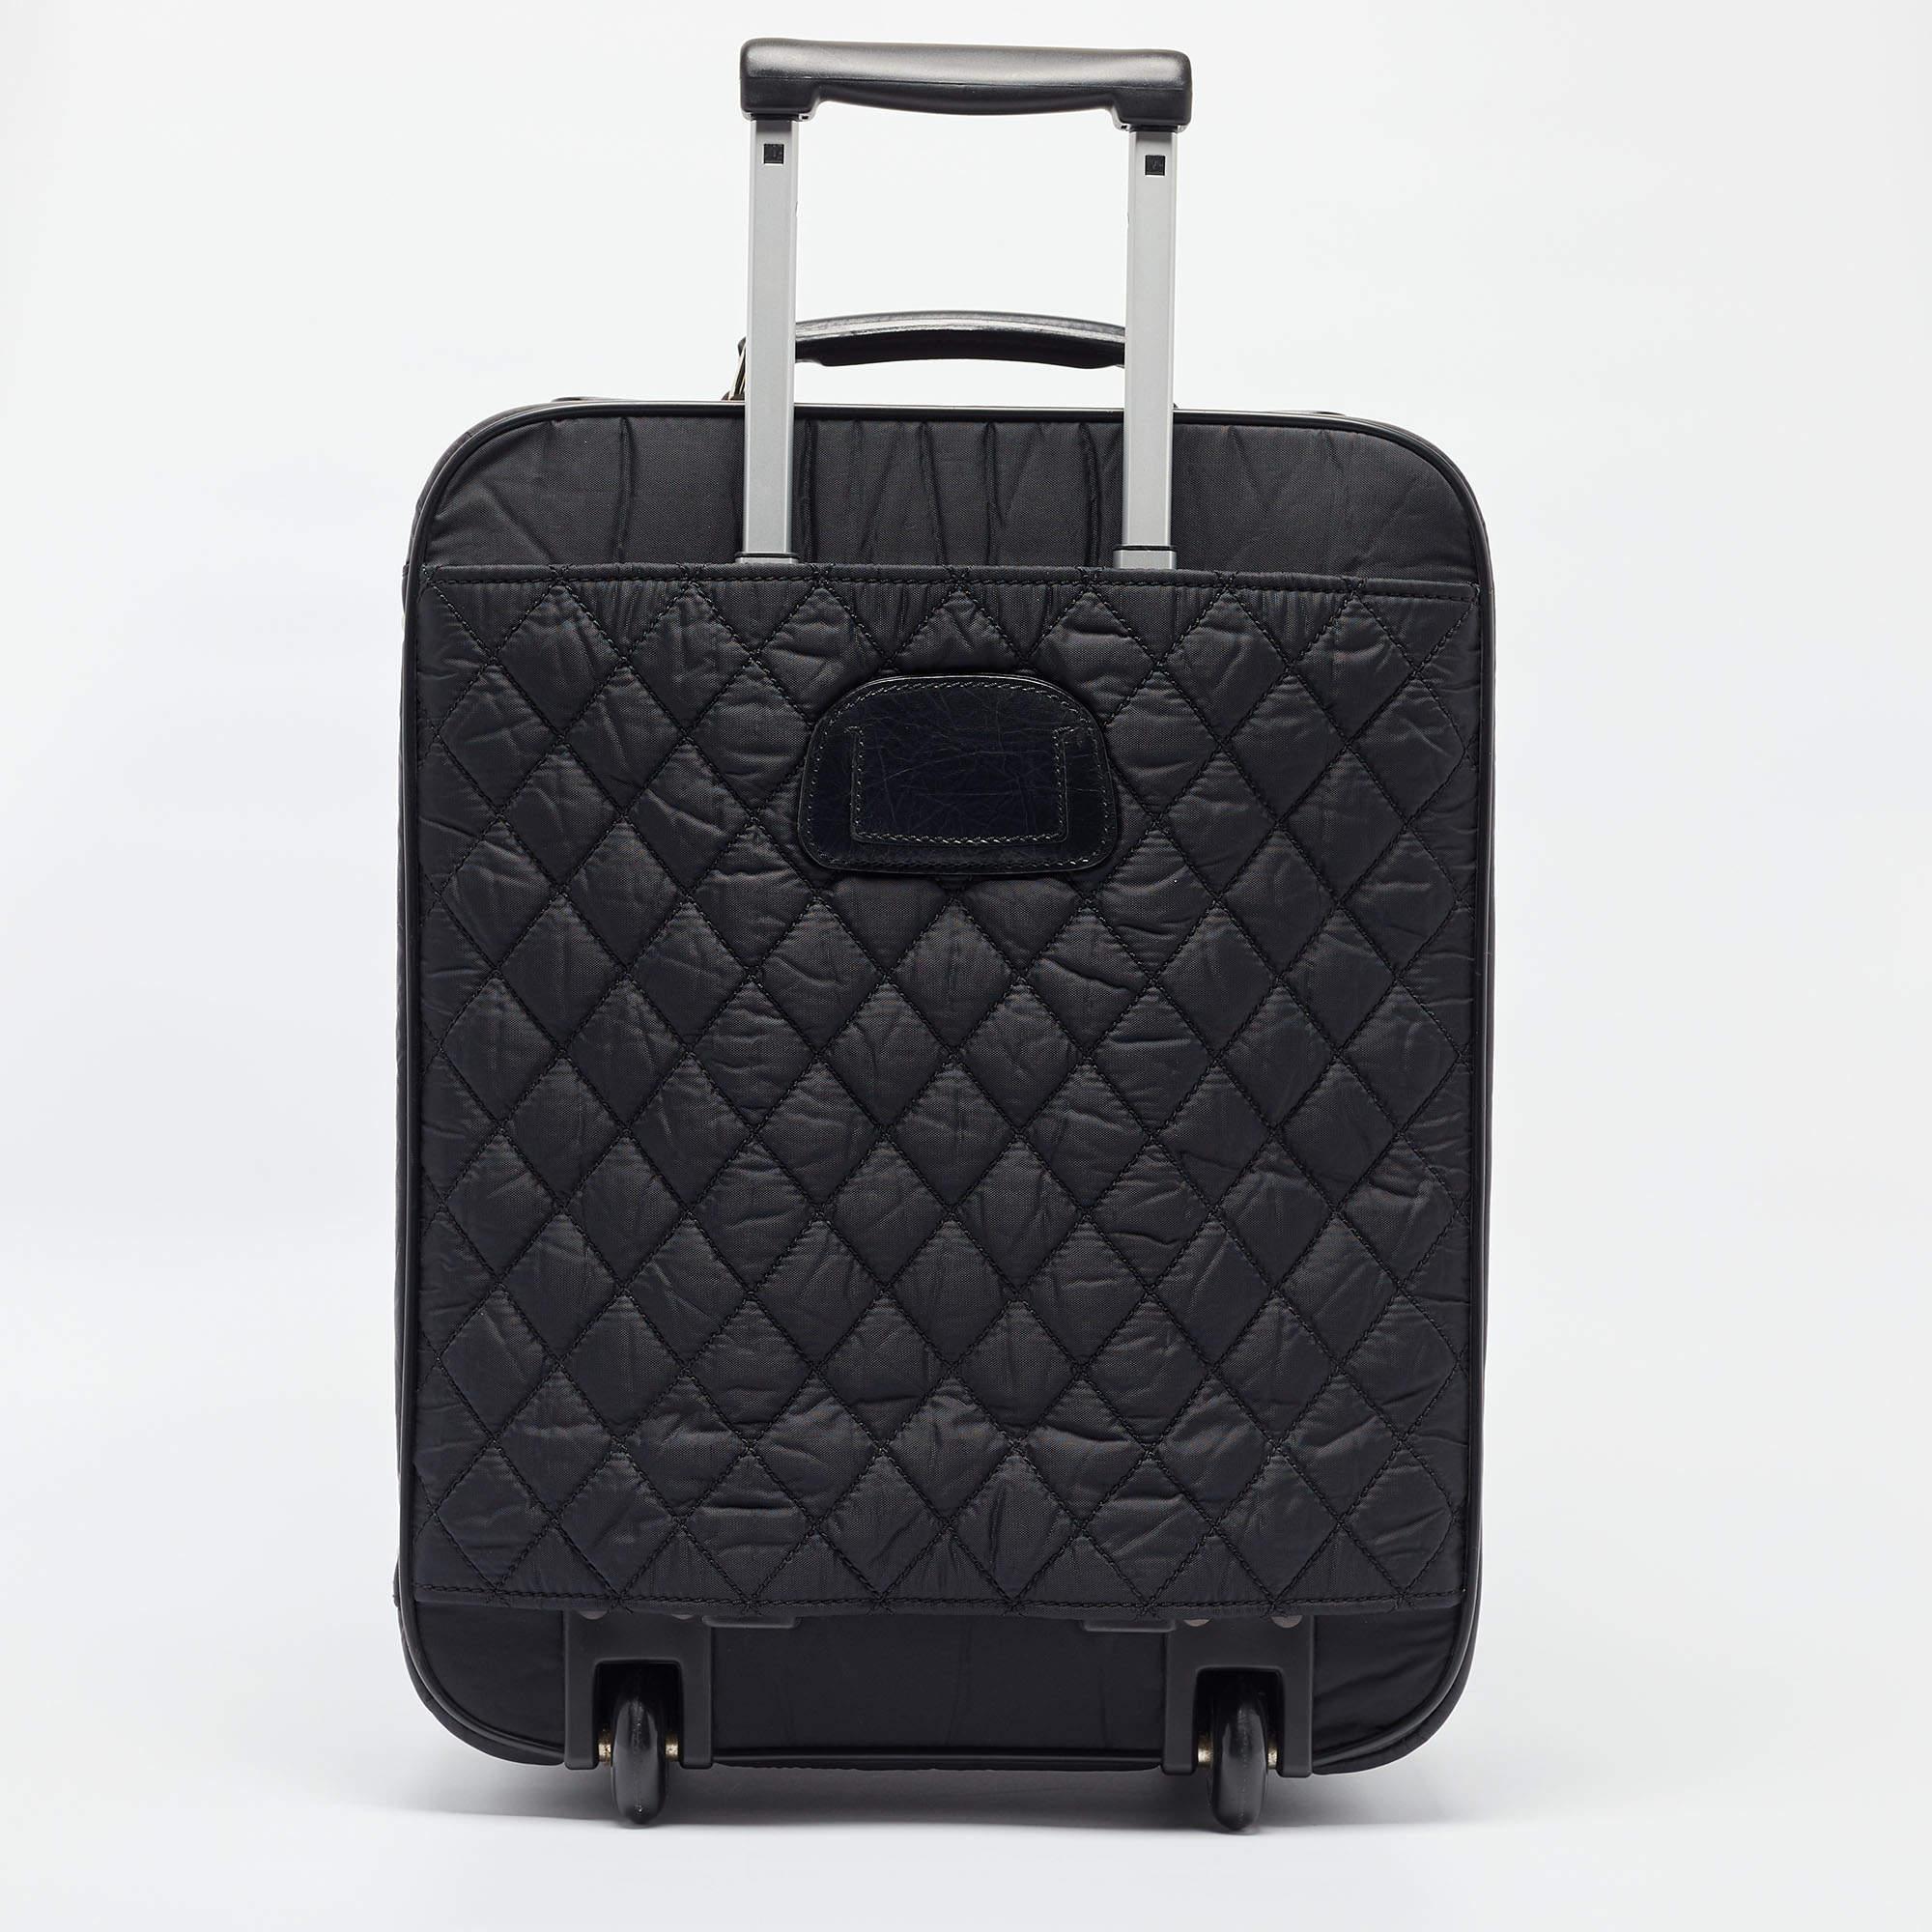 Presenting the Chanel CC luggage, a fusion of luxury and practicality. Crafted with durable quilted nylon, it exudes timeless charm. The iconic CC logo adds a touch of elegance. Equipped with two smooth-rolling wheels, it promises effortless travel.